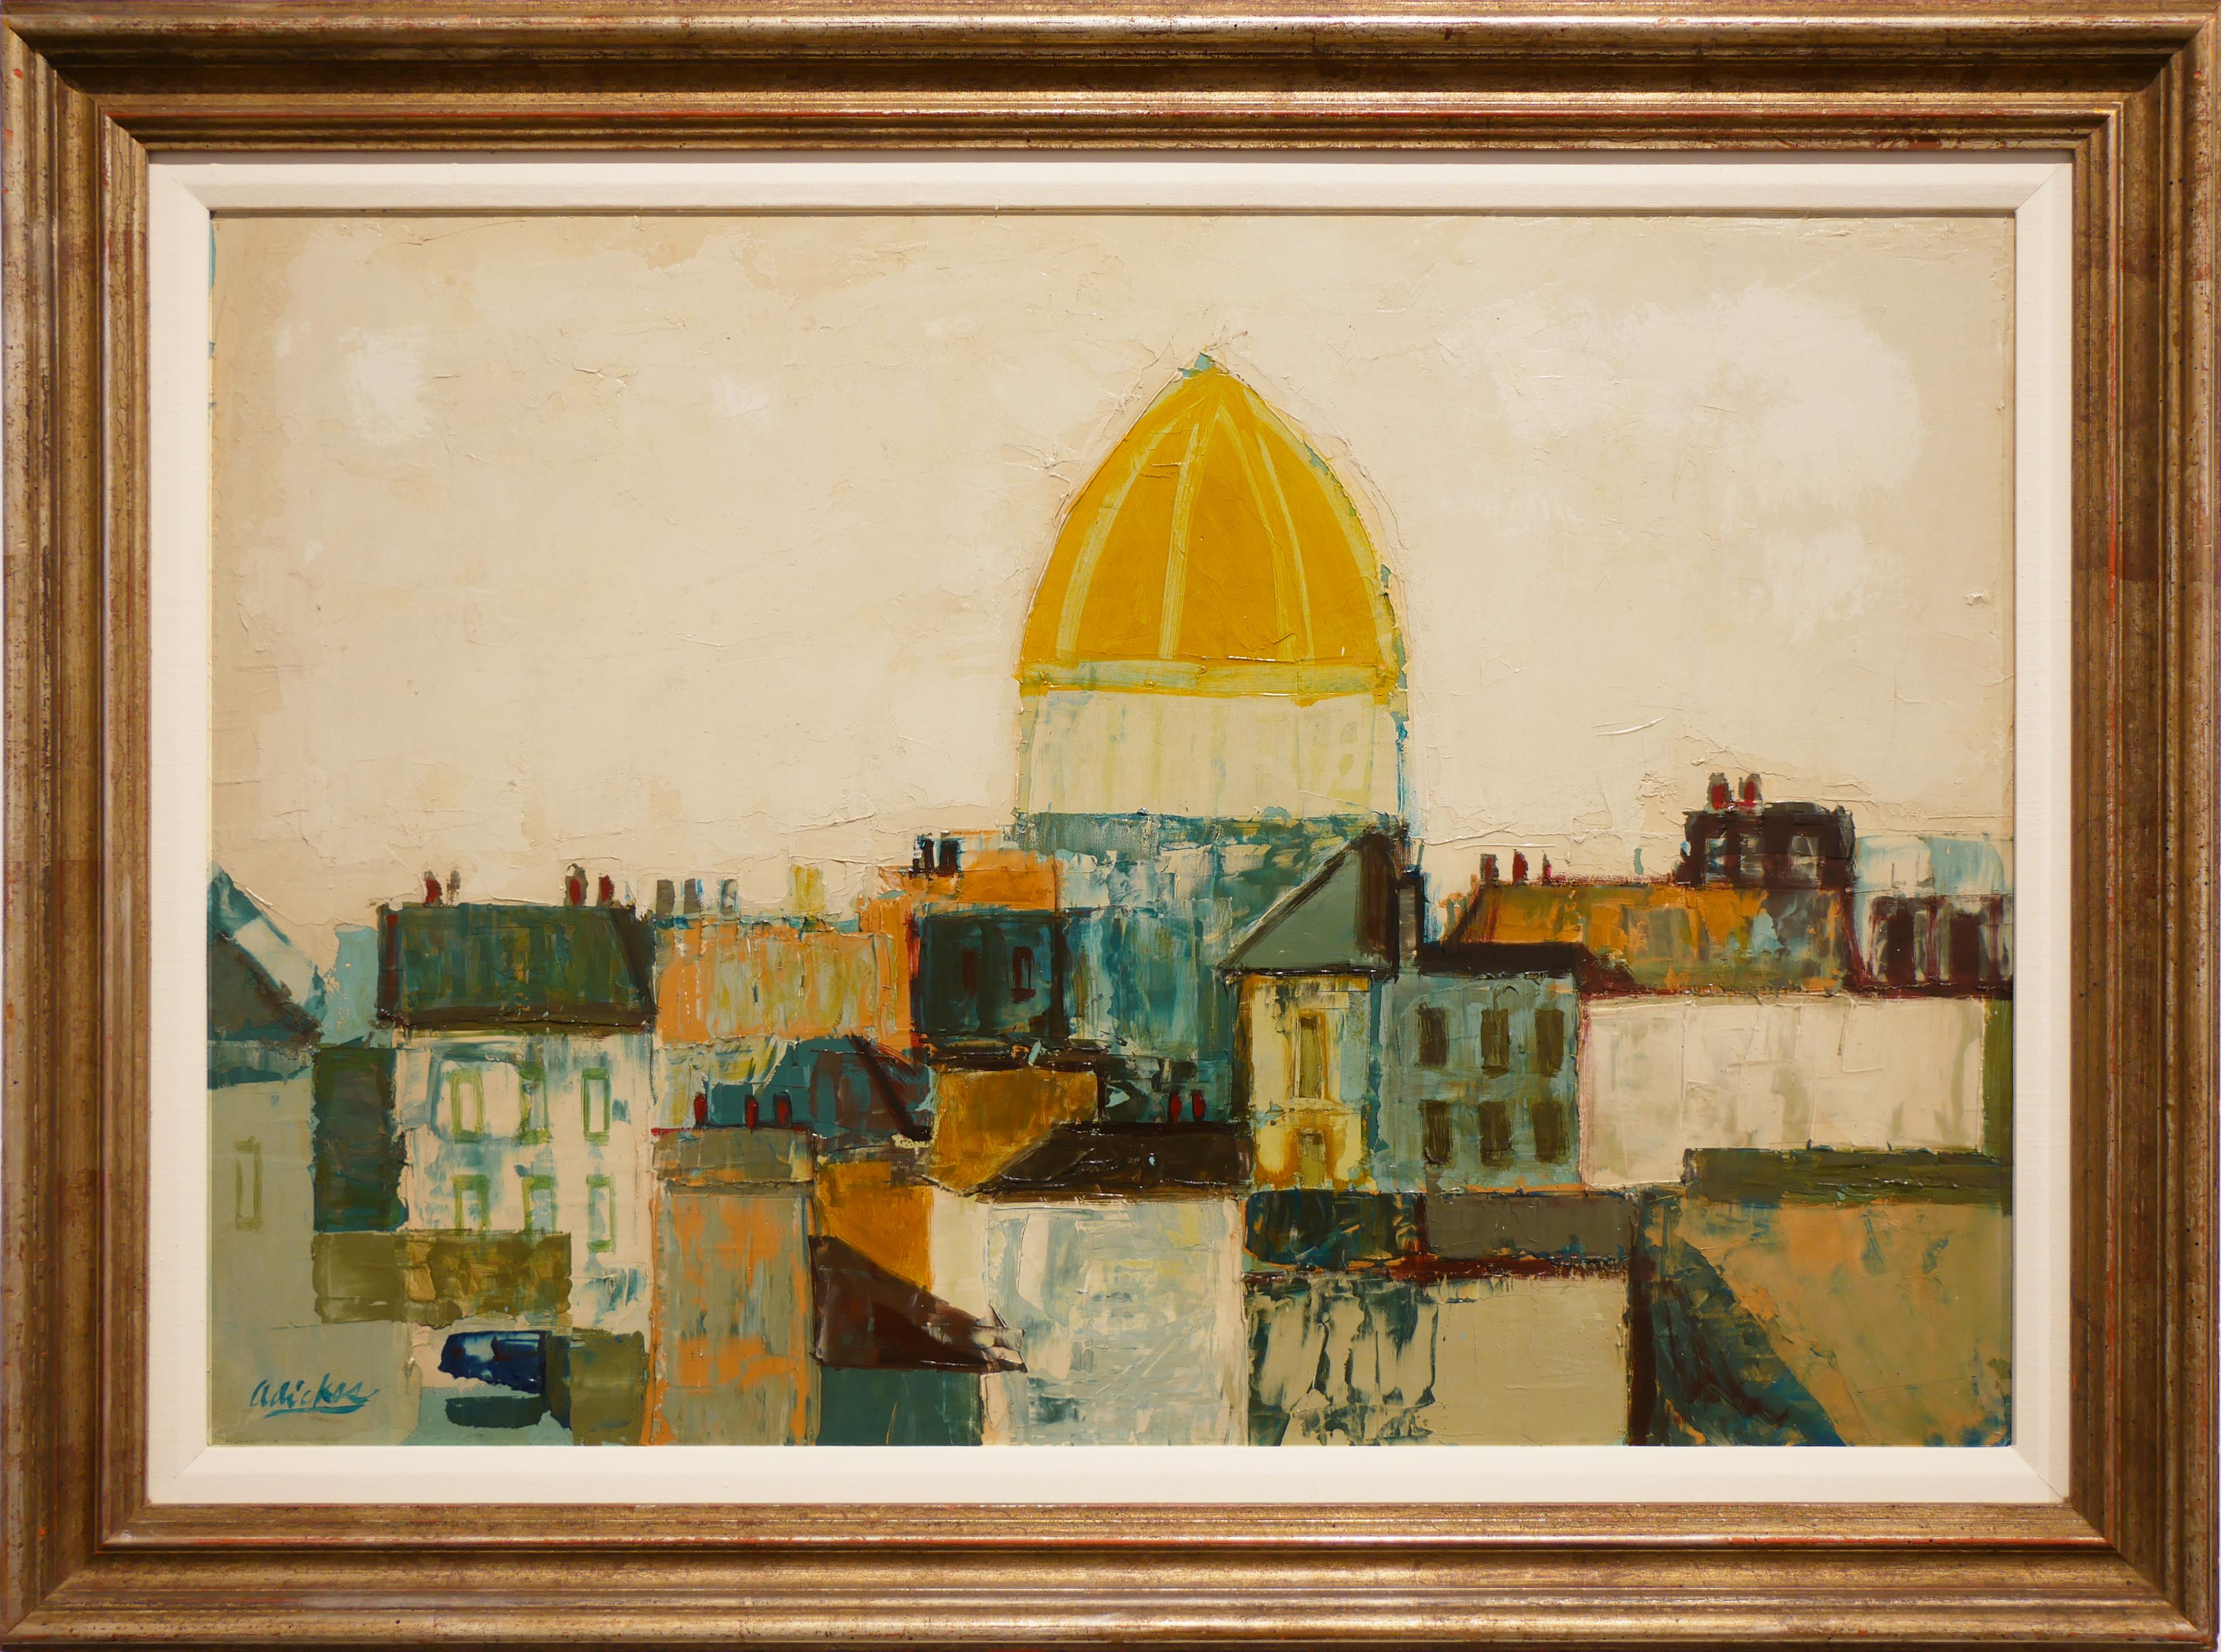 David Adickes Abstract Painting - "The Gold Dome" Modern Abstract Yellow & Brown Toned Italian Landscape Painting 